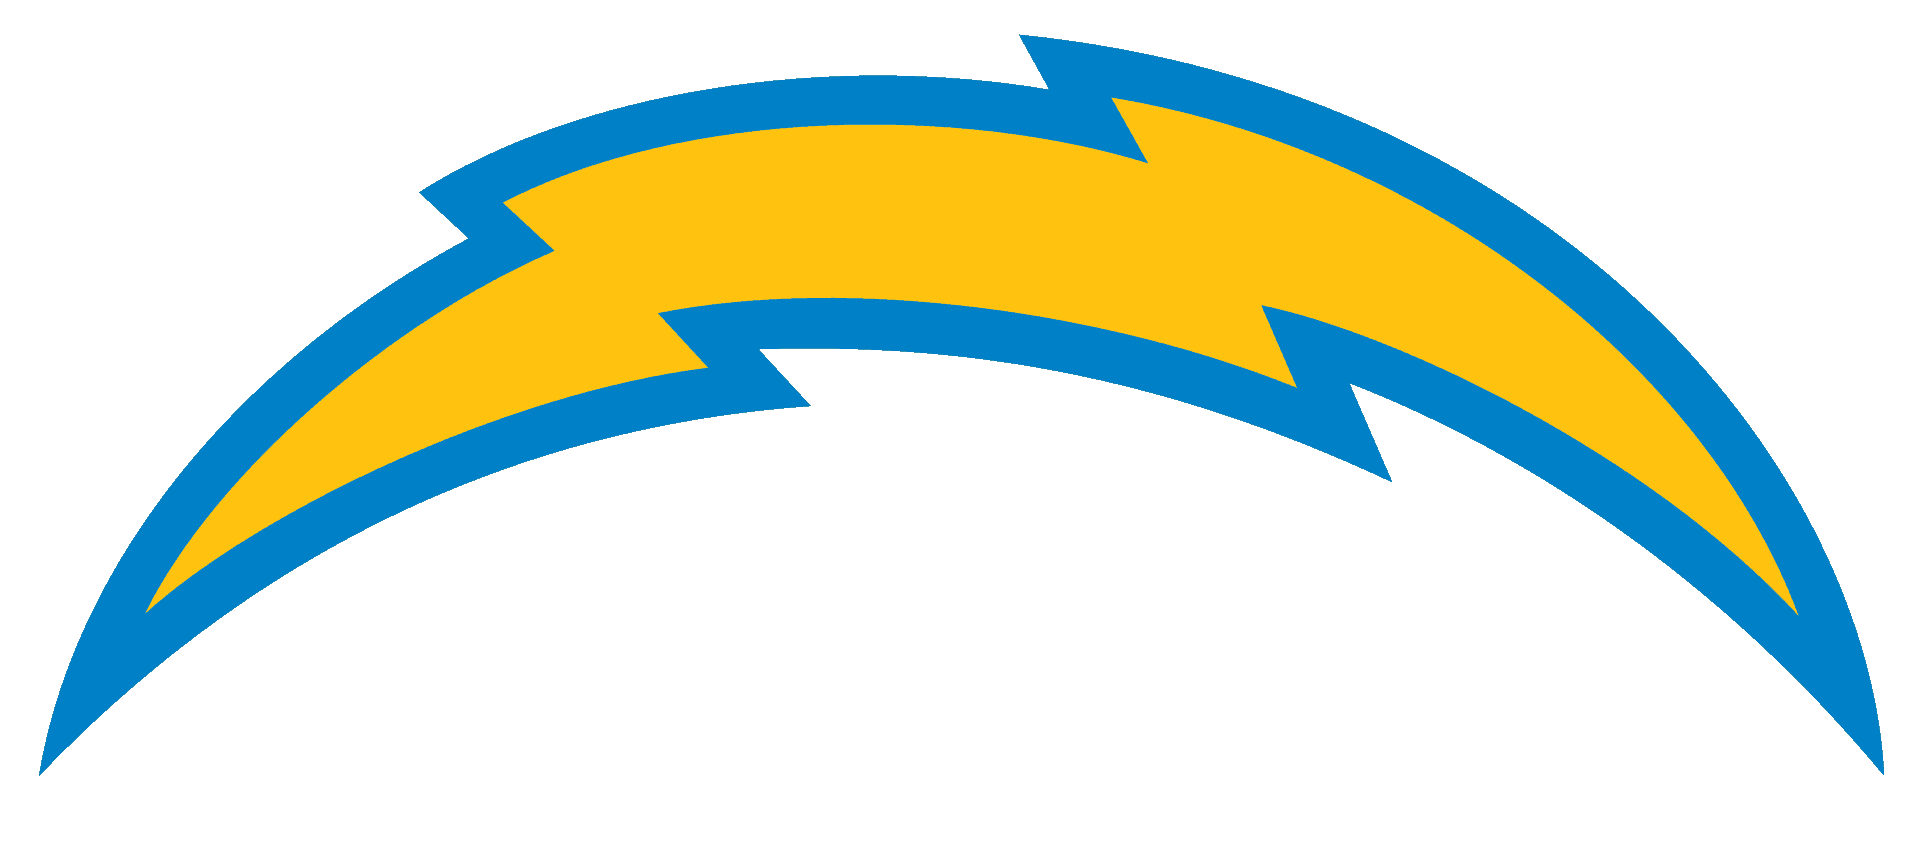 legally betting on the los angeles chargers odds to win